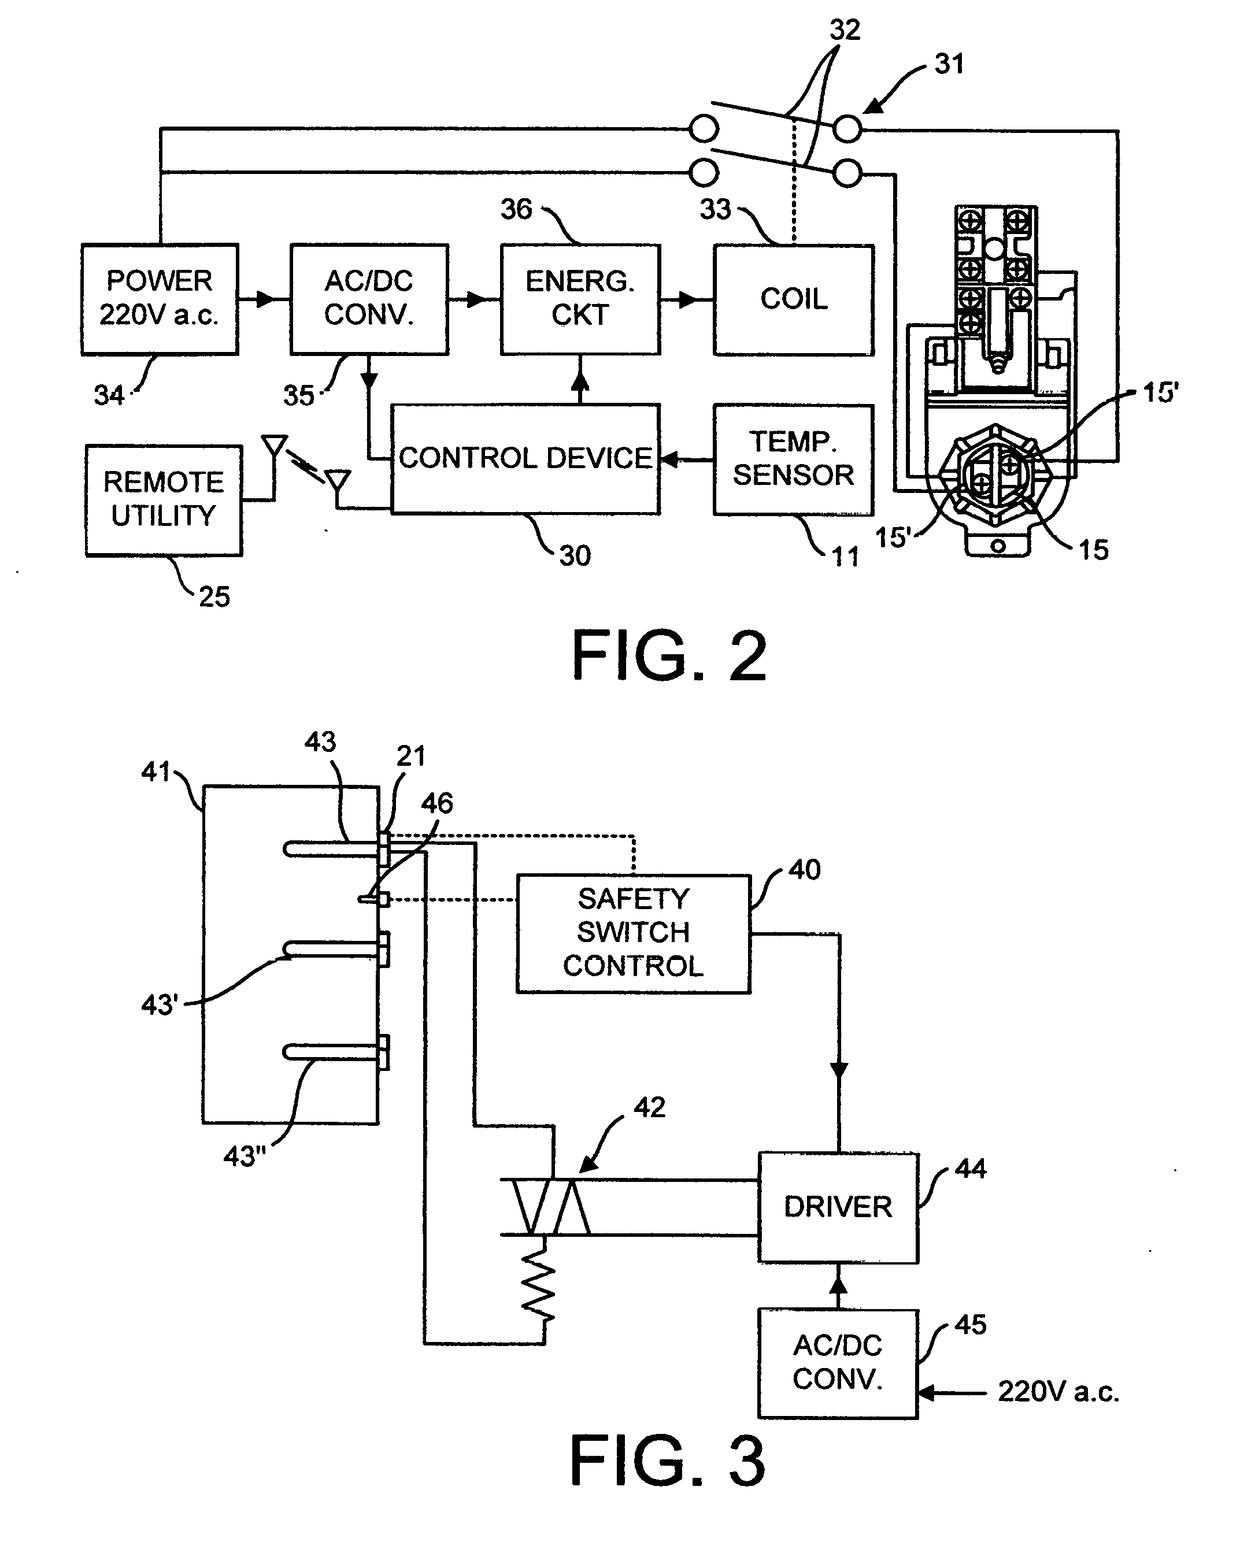 Safety power connecting system and method for electric water heaters